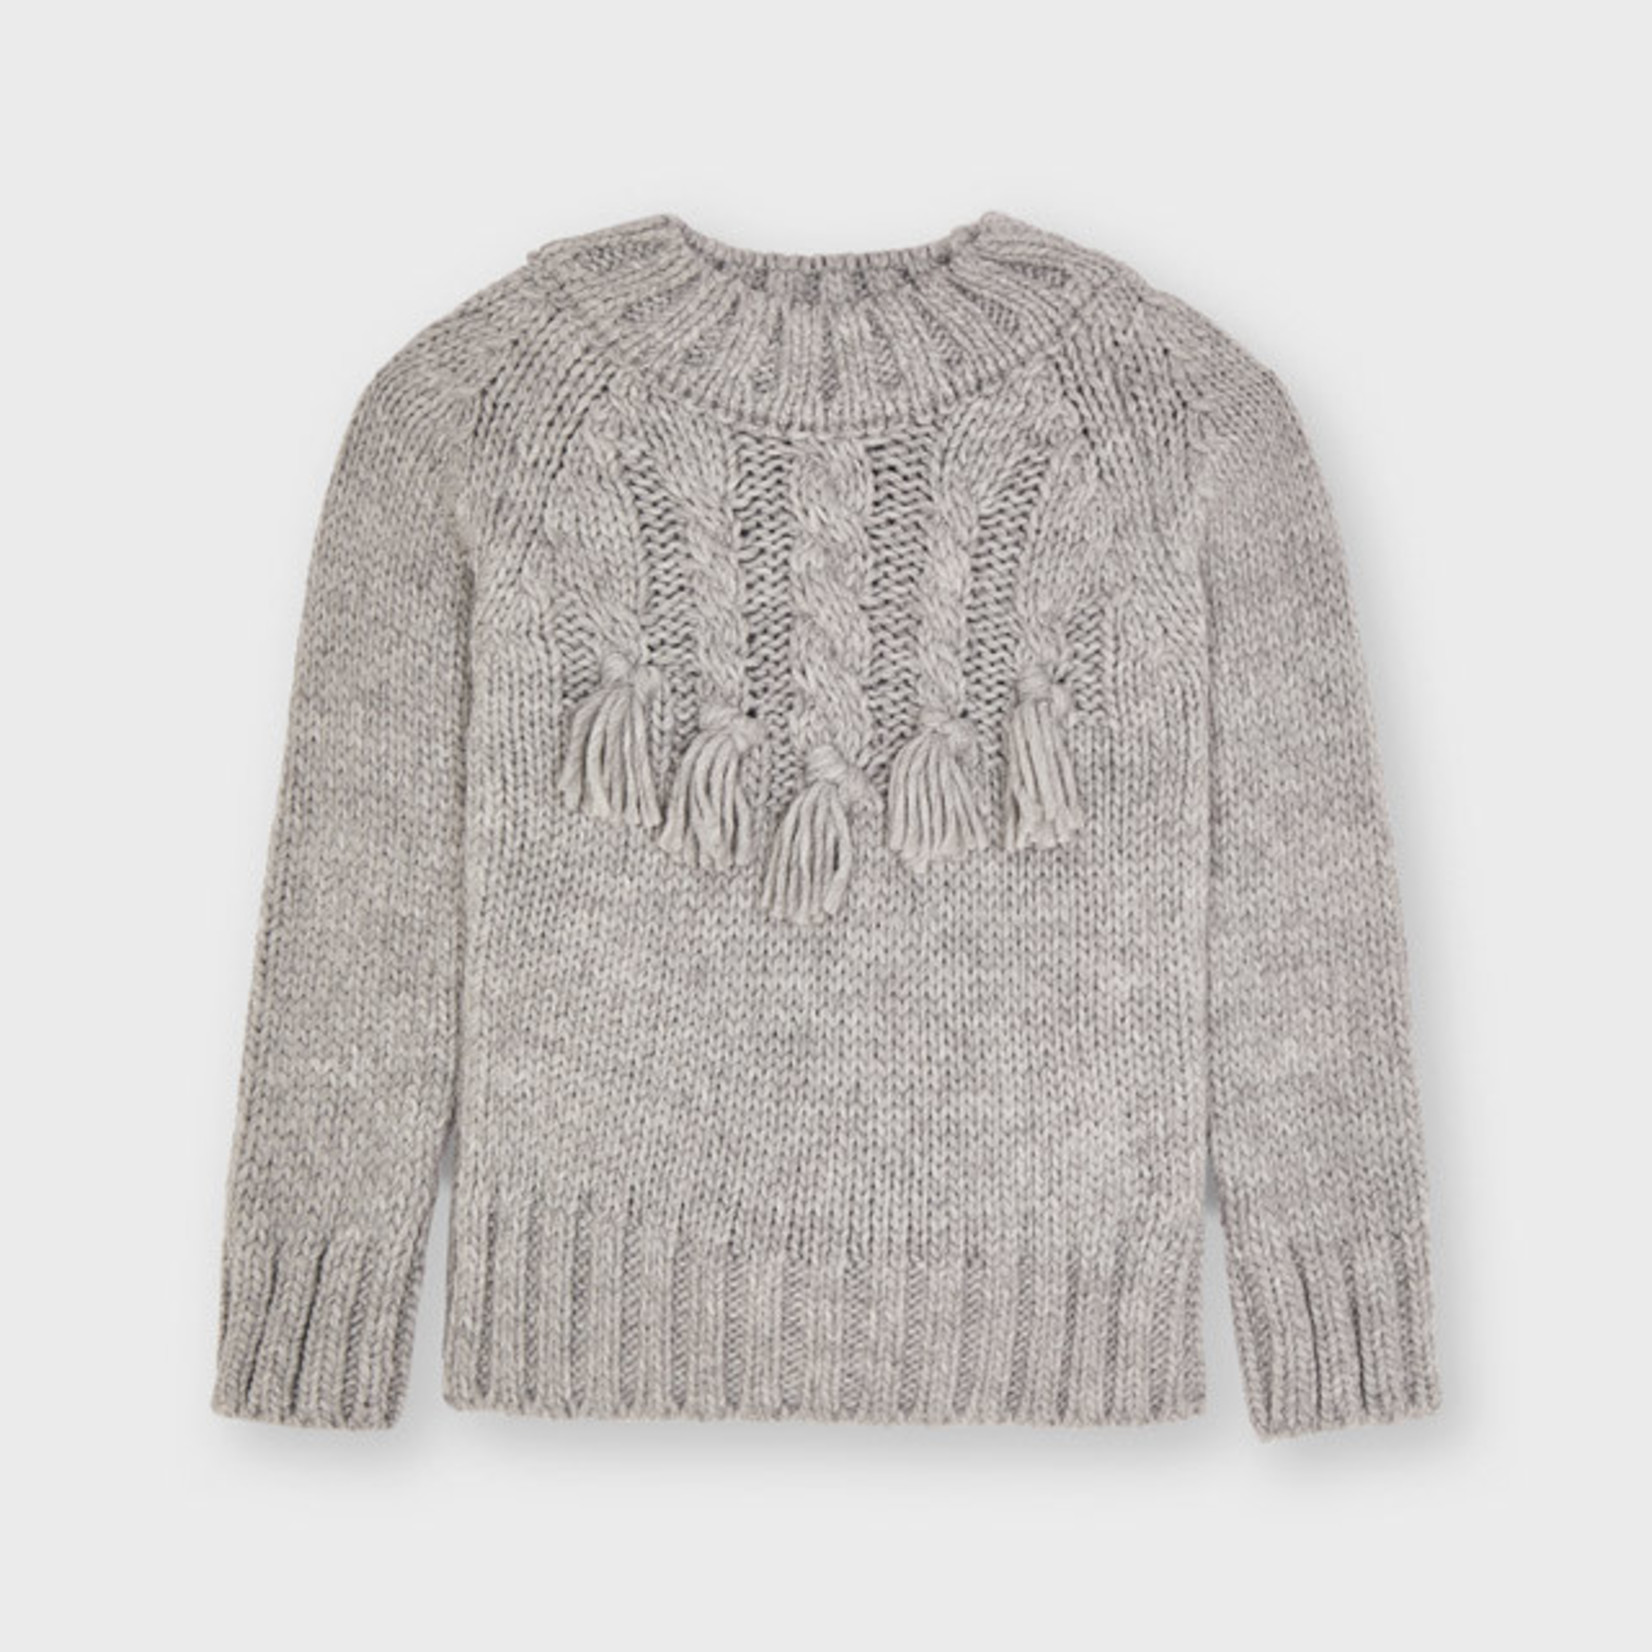 Mayoral Braided Sweater, Silver Gray